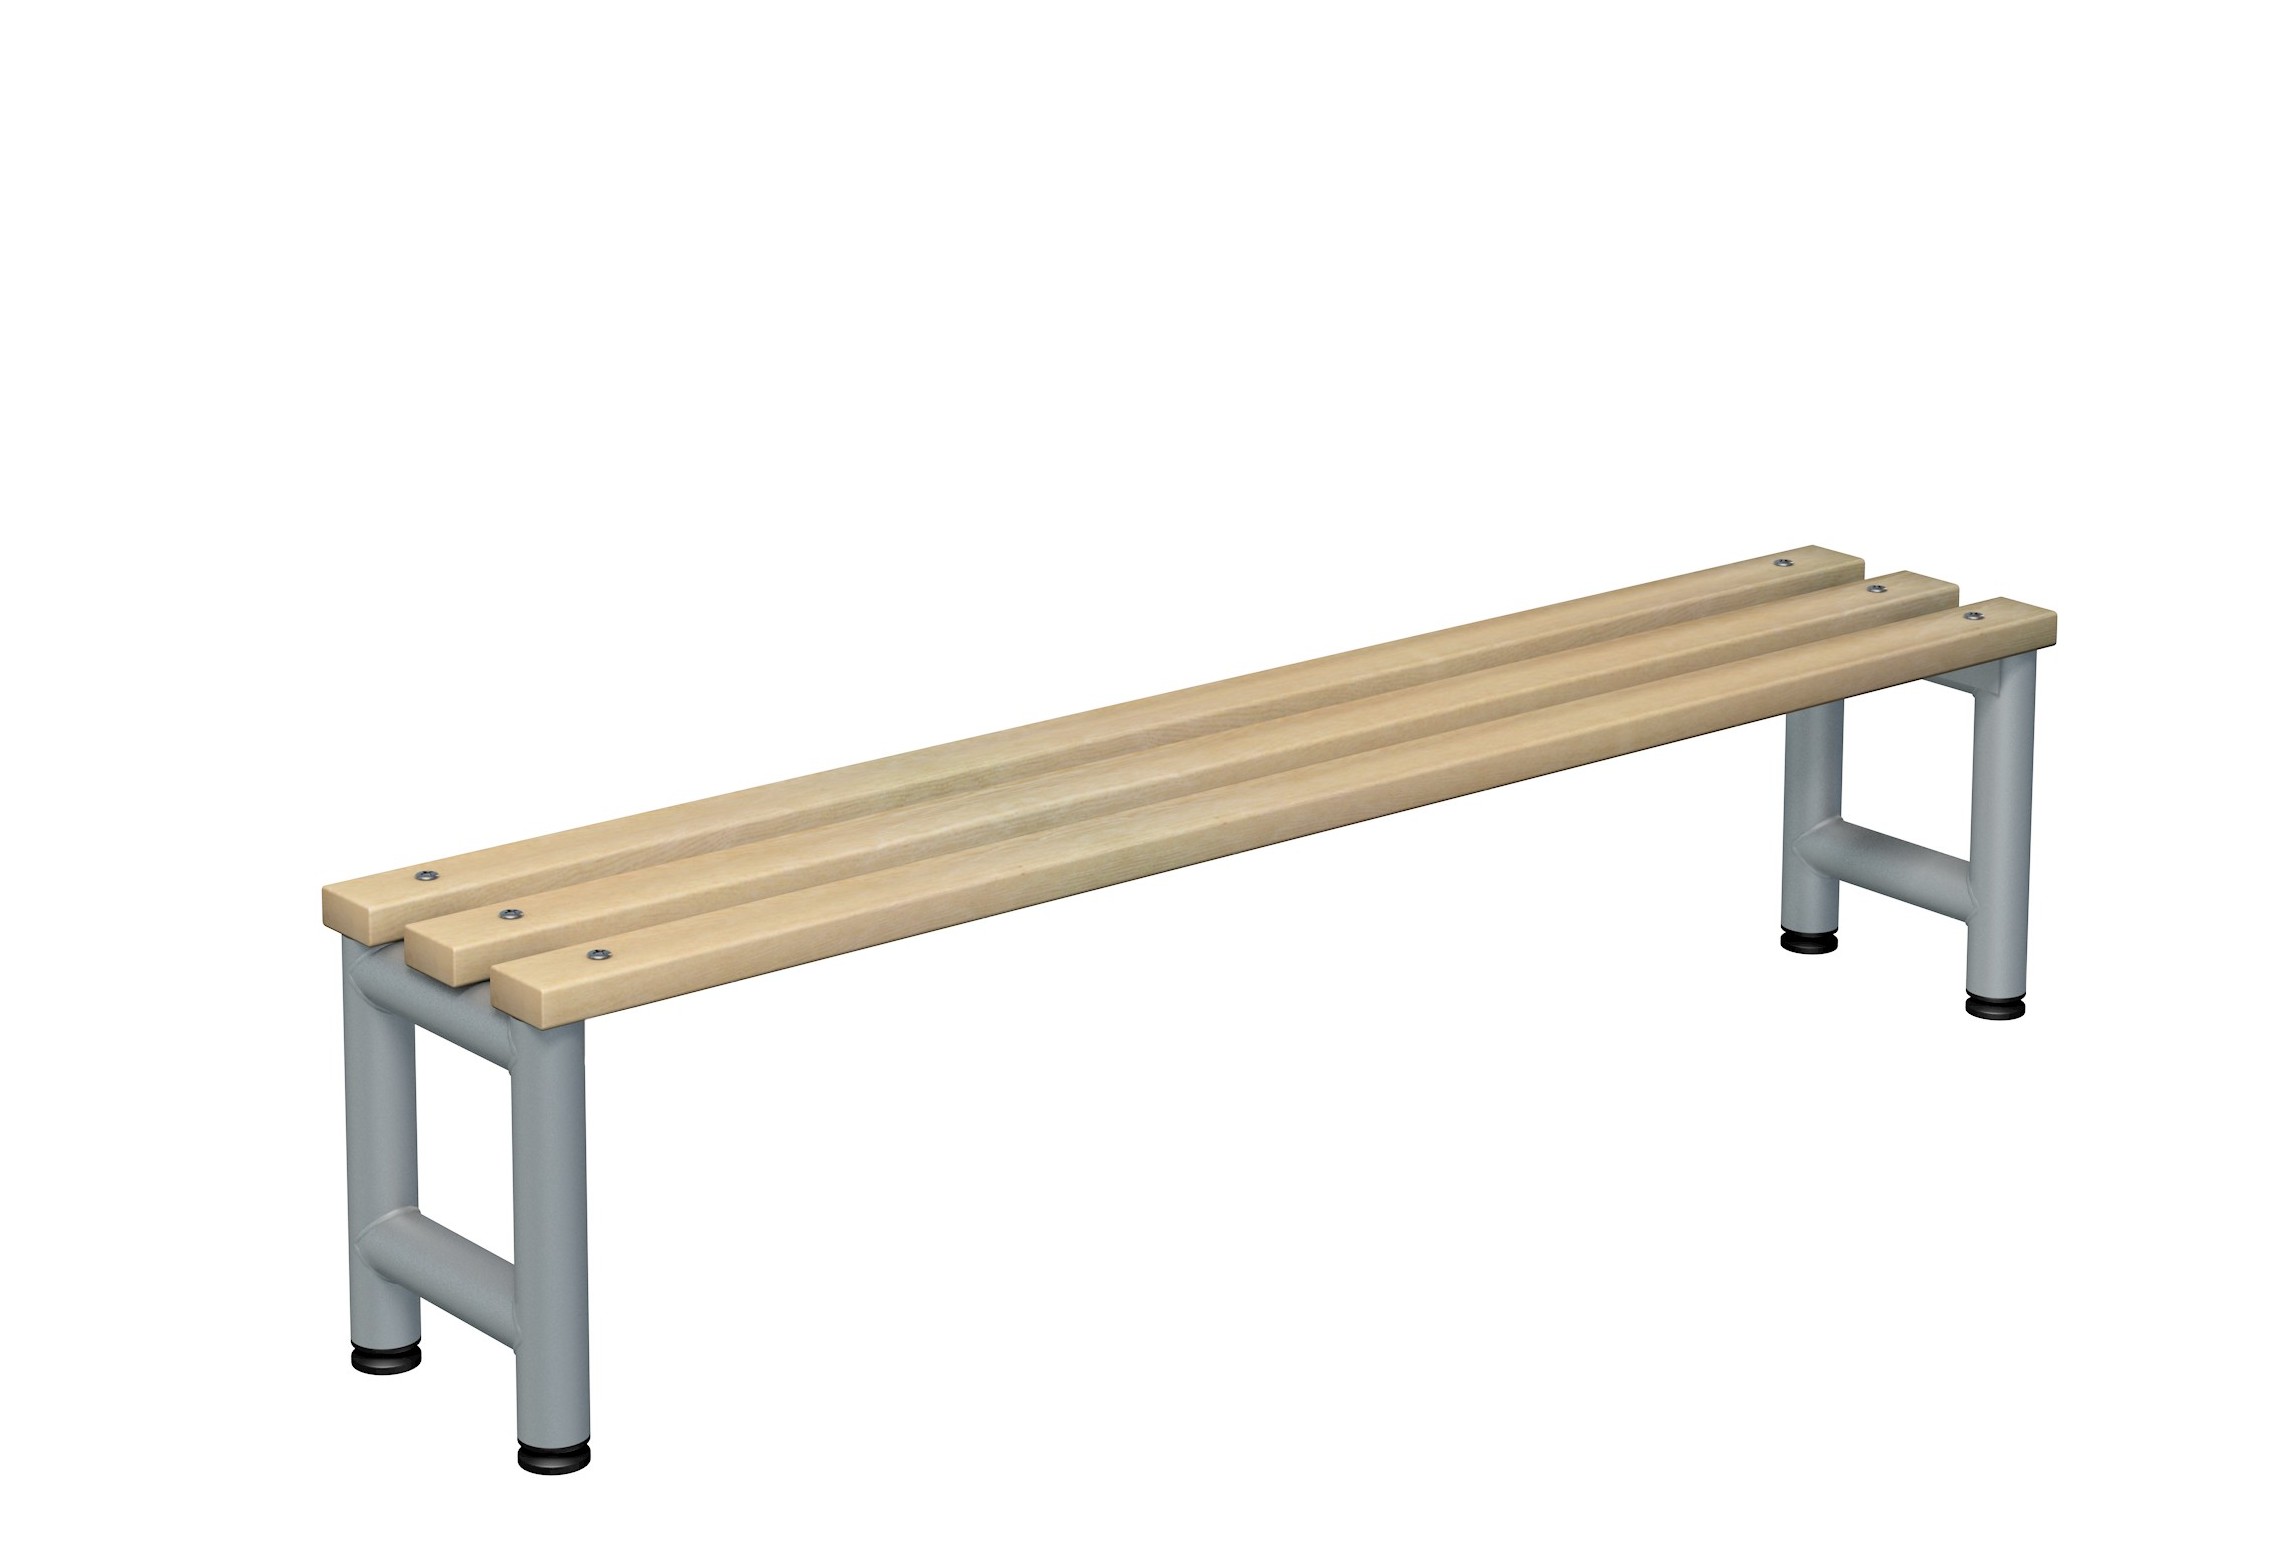 Single Sided Bench